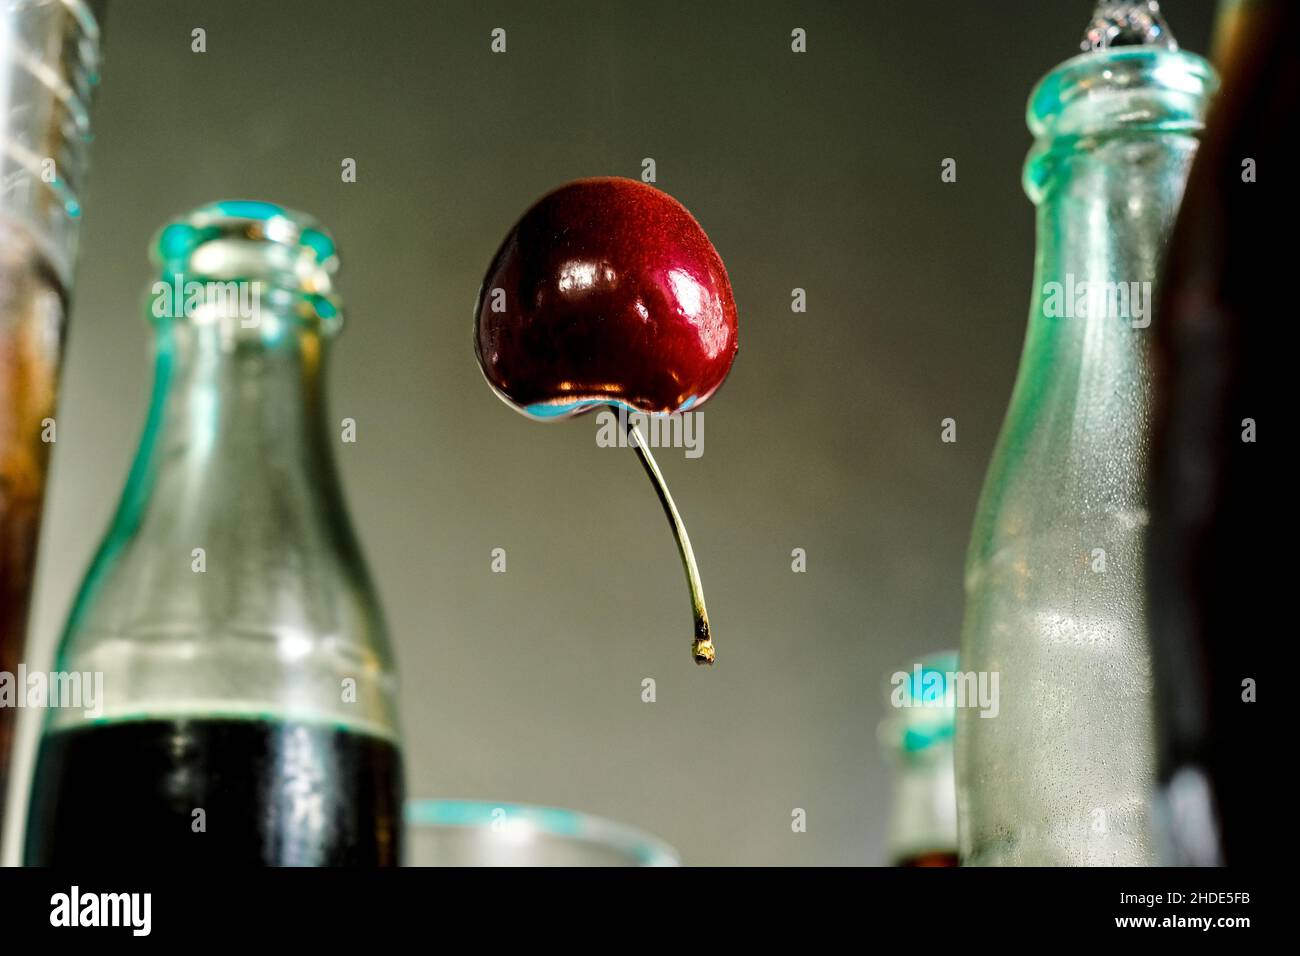 Cherry floats through the air like a balloon surrounded by cola bottles Stock Photo